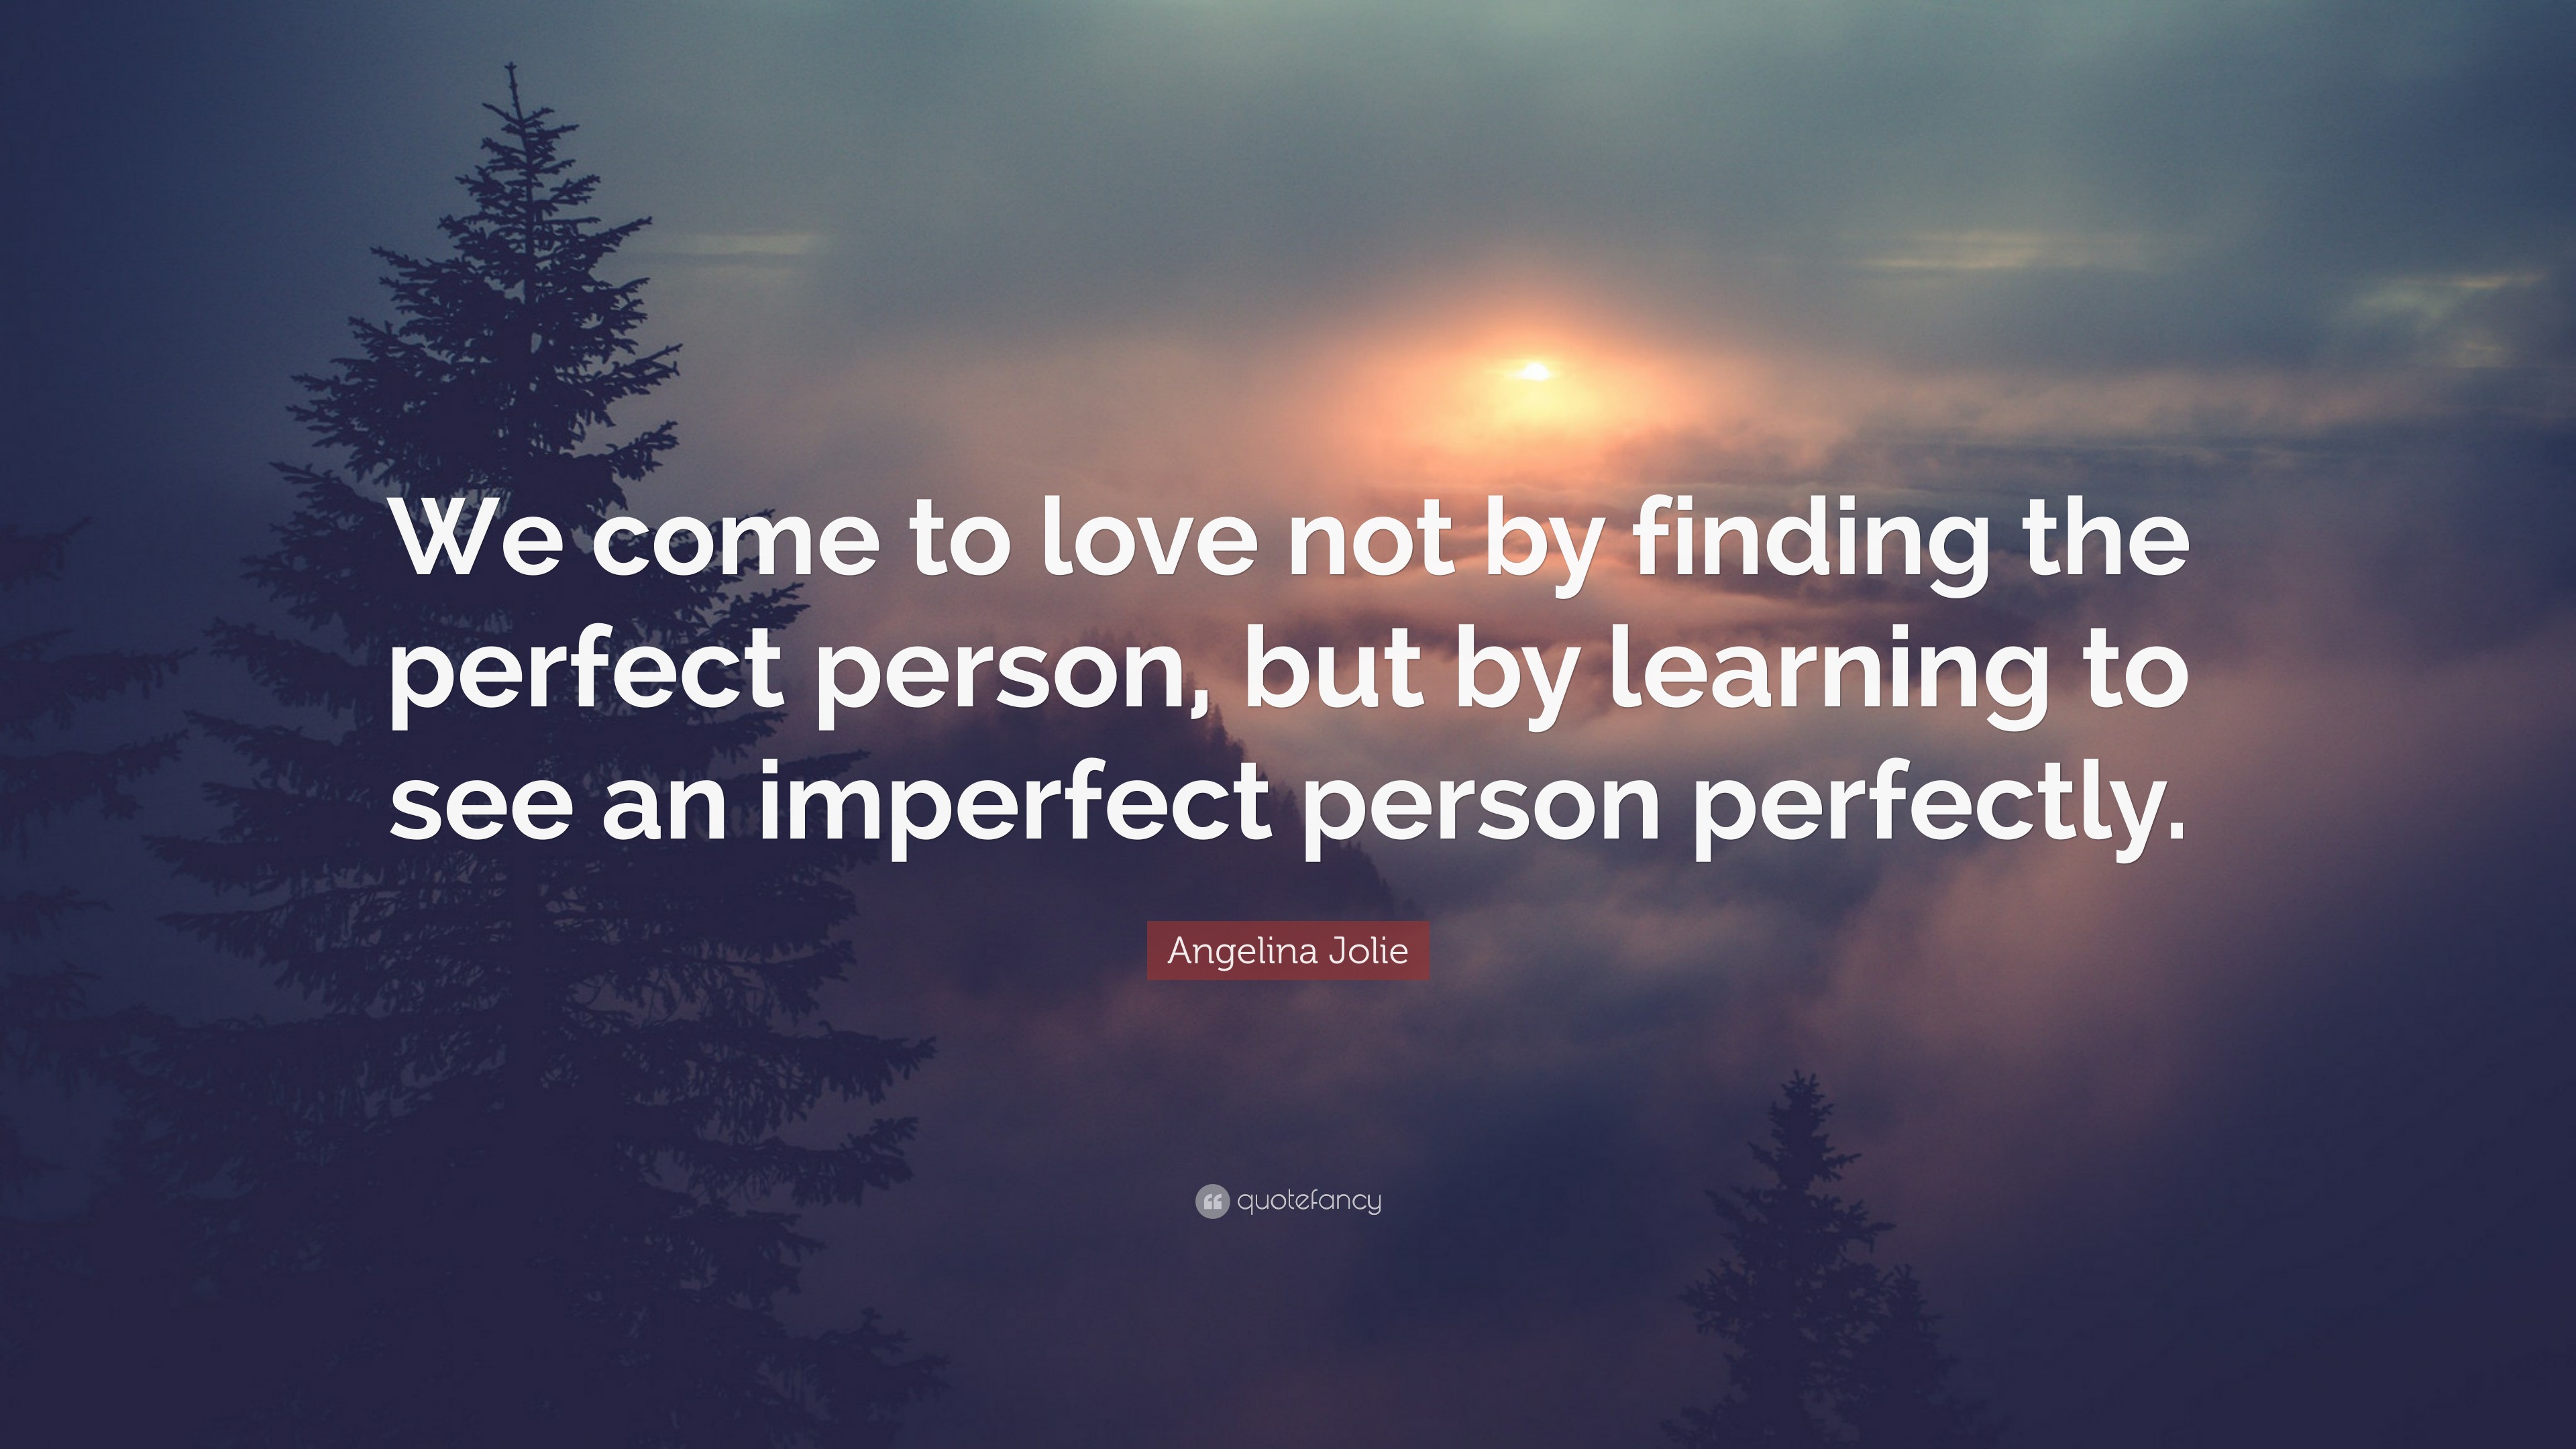 Angelina Jolie Quote: “We Come To Love Not By Finding The Perfect Person, But By Learning